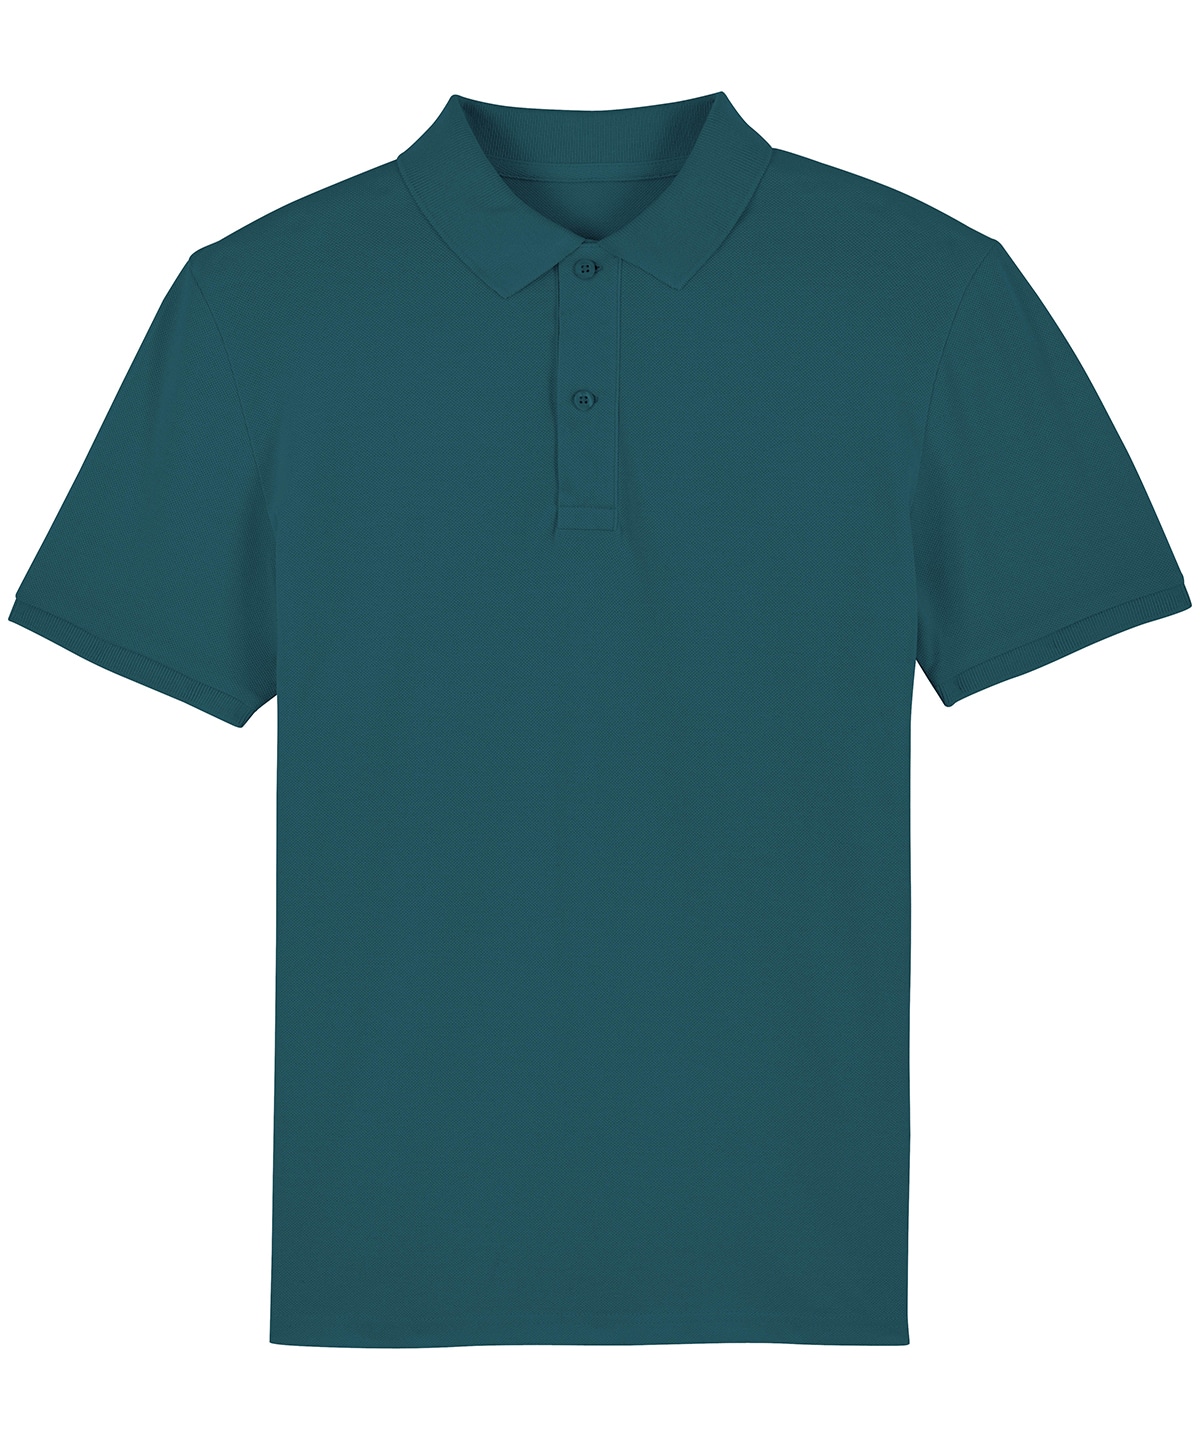 Stanley Stella Prepster Polo – Unisex Fit